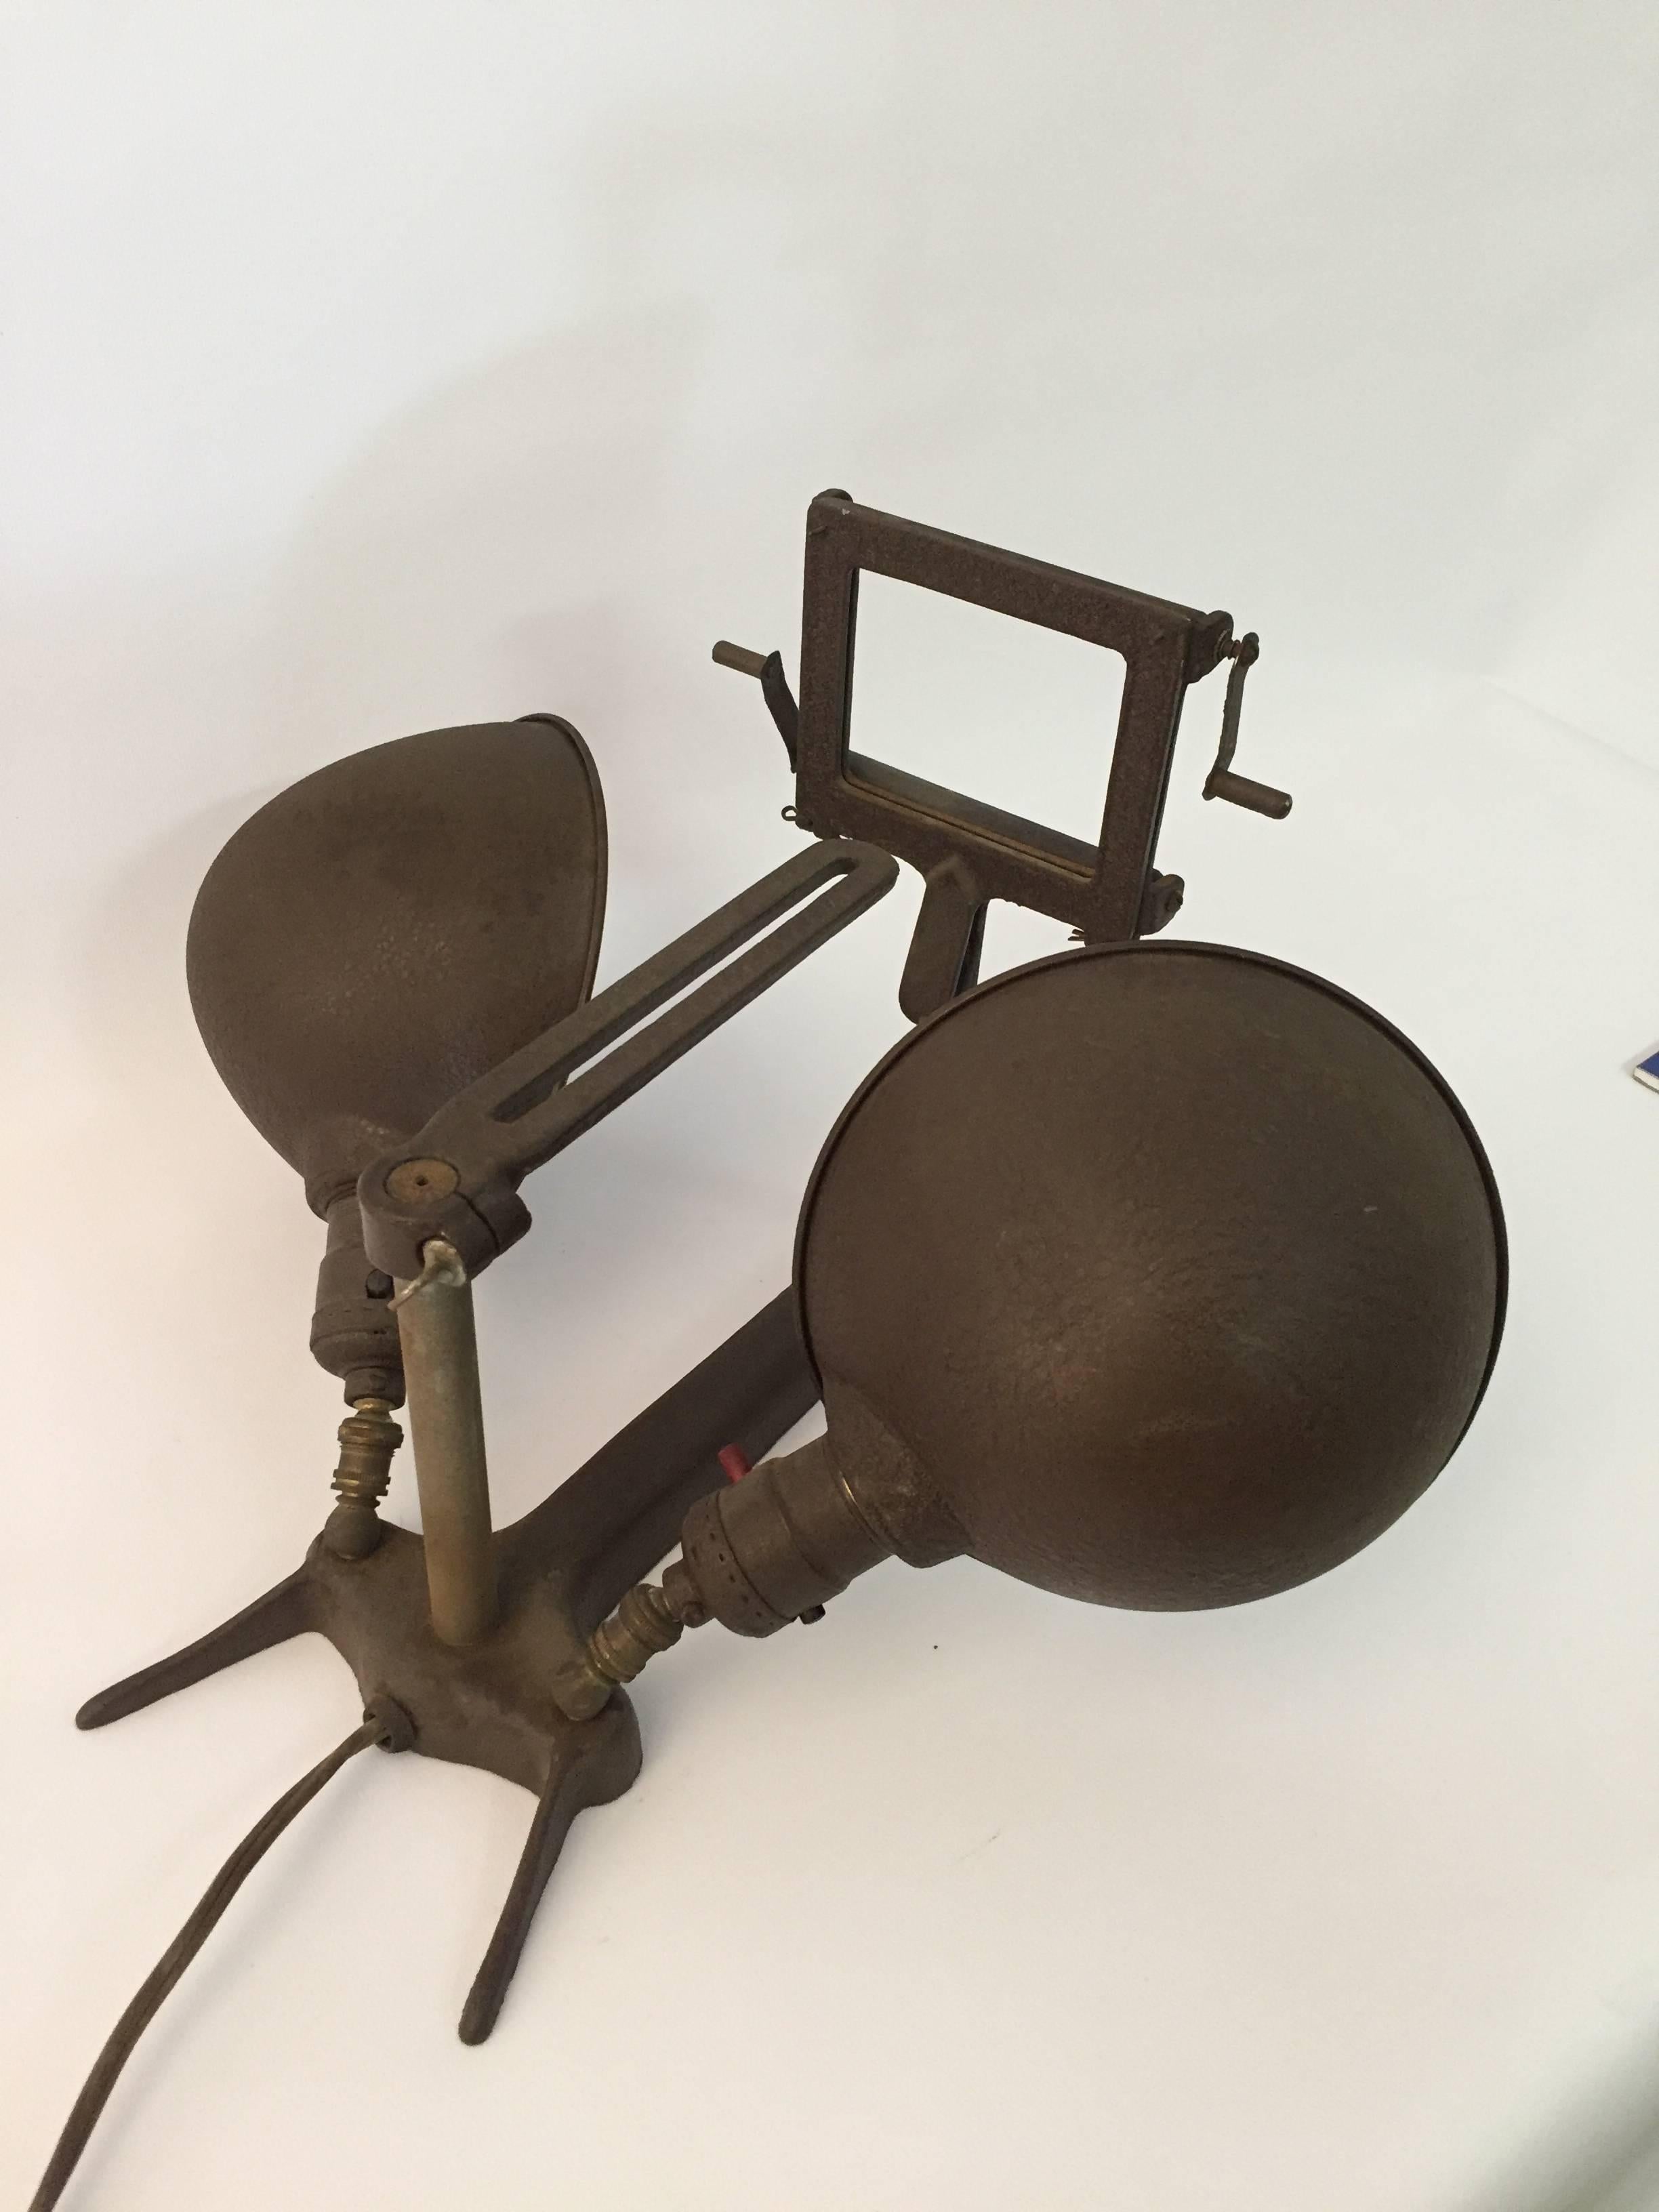 It's just an oddity of a lamp. Powder coated in olive drab this two headed lamp features a little slide screen for viewing or projecting images, adjustable shades and small wood rollers. It's meant to be placed on a flat surface for viewing